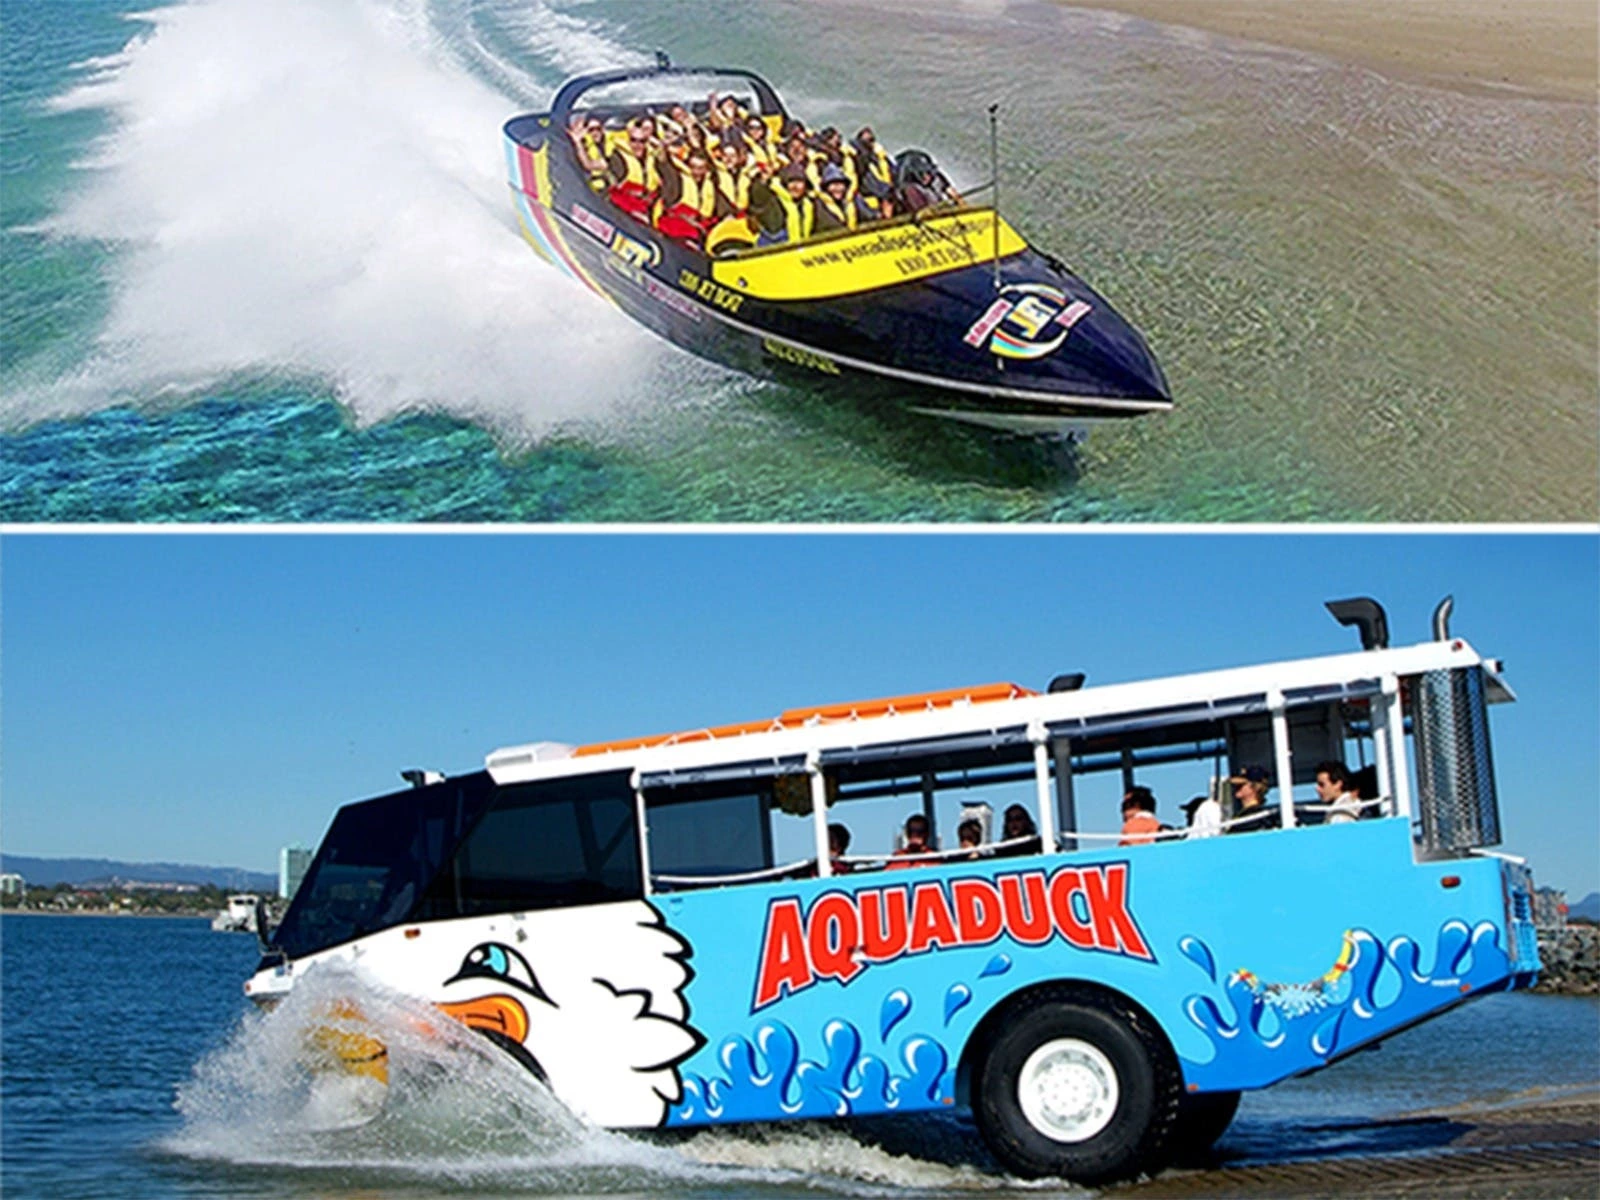 Gold Coast Jet Boat Ride & Aquaduck Ride for only $82